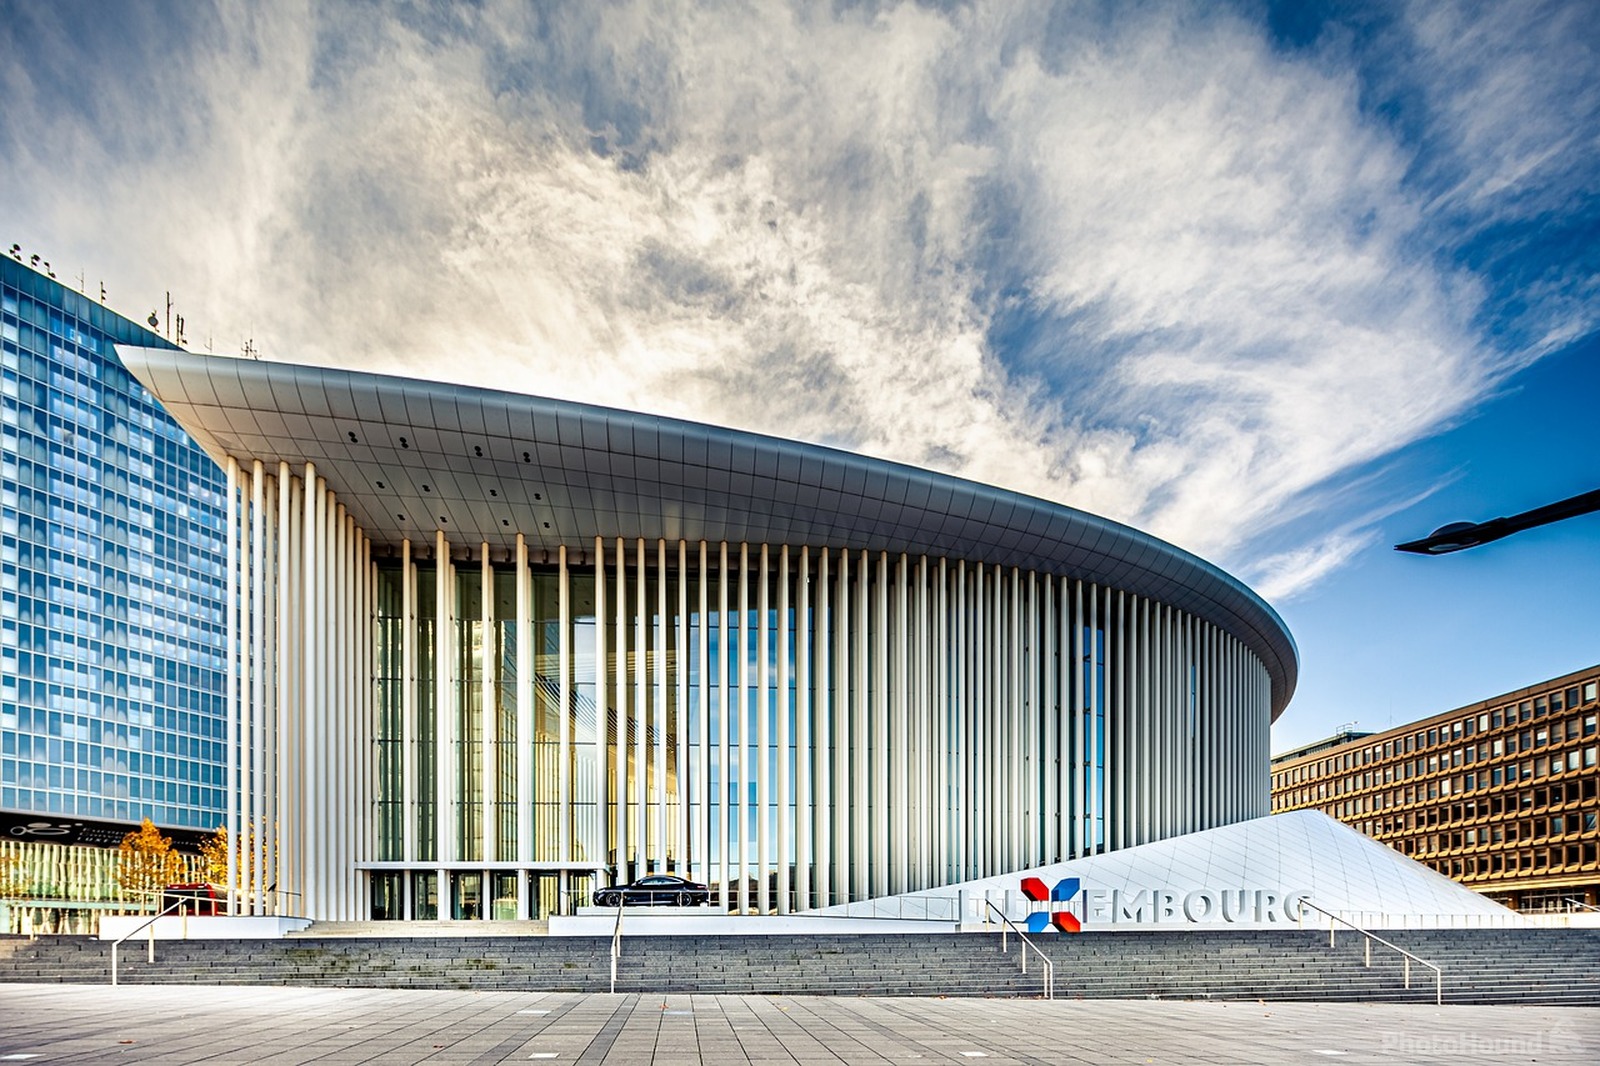 Image of Luxembourg Philharmonie - Exterior by Team PhotoHound